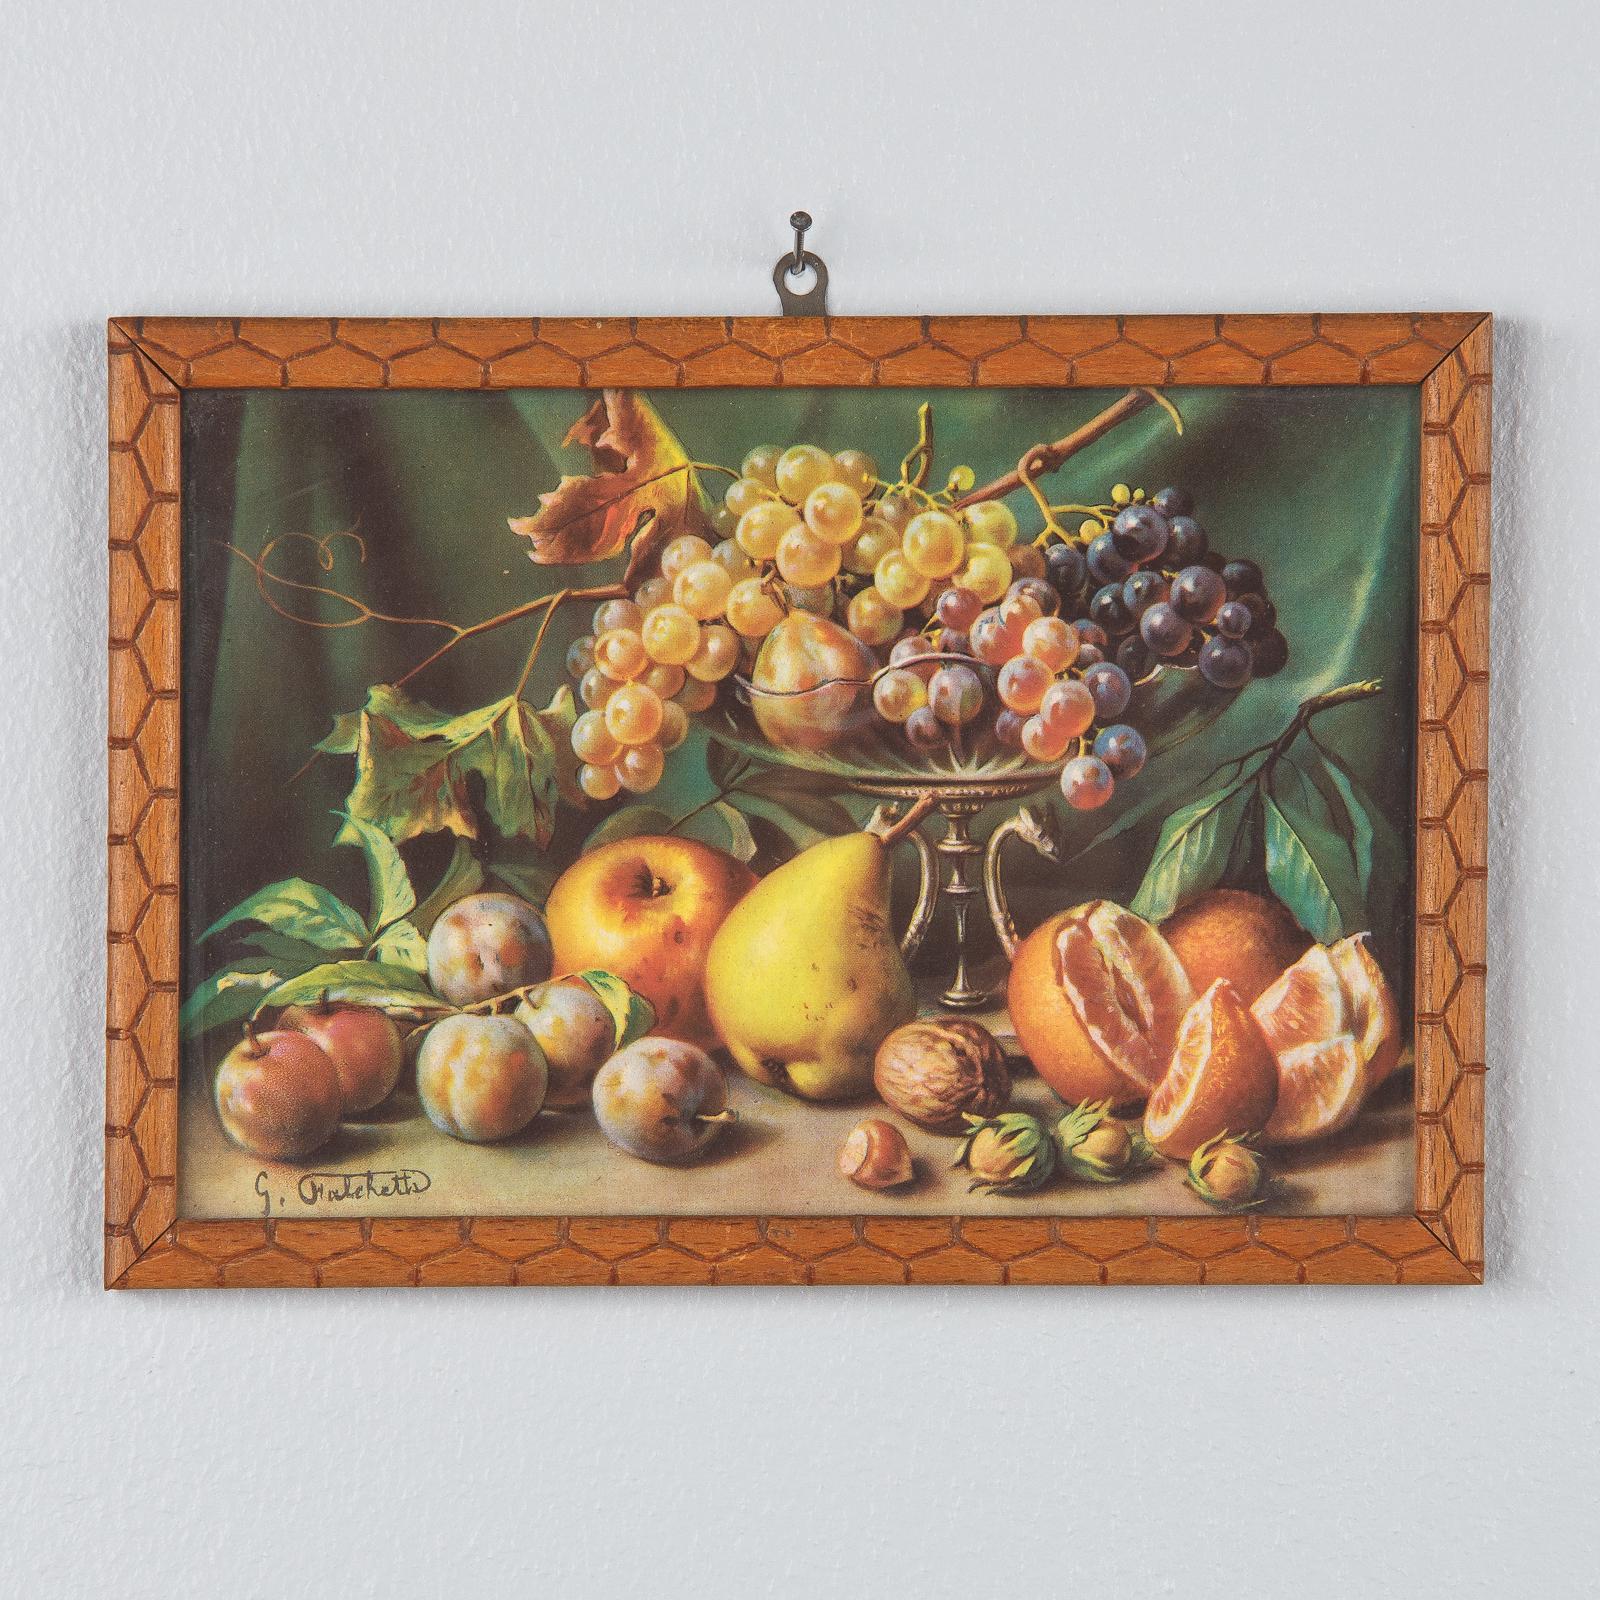 A pair of small framed printed still-life paintings by Giuseppe Falchetti, Italian, circa 1920. Lush still-lives loaded with pears, grapes, peaches, cherries, plums and more framed under glass with carved beechwood frames. Nice quality print with